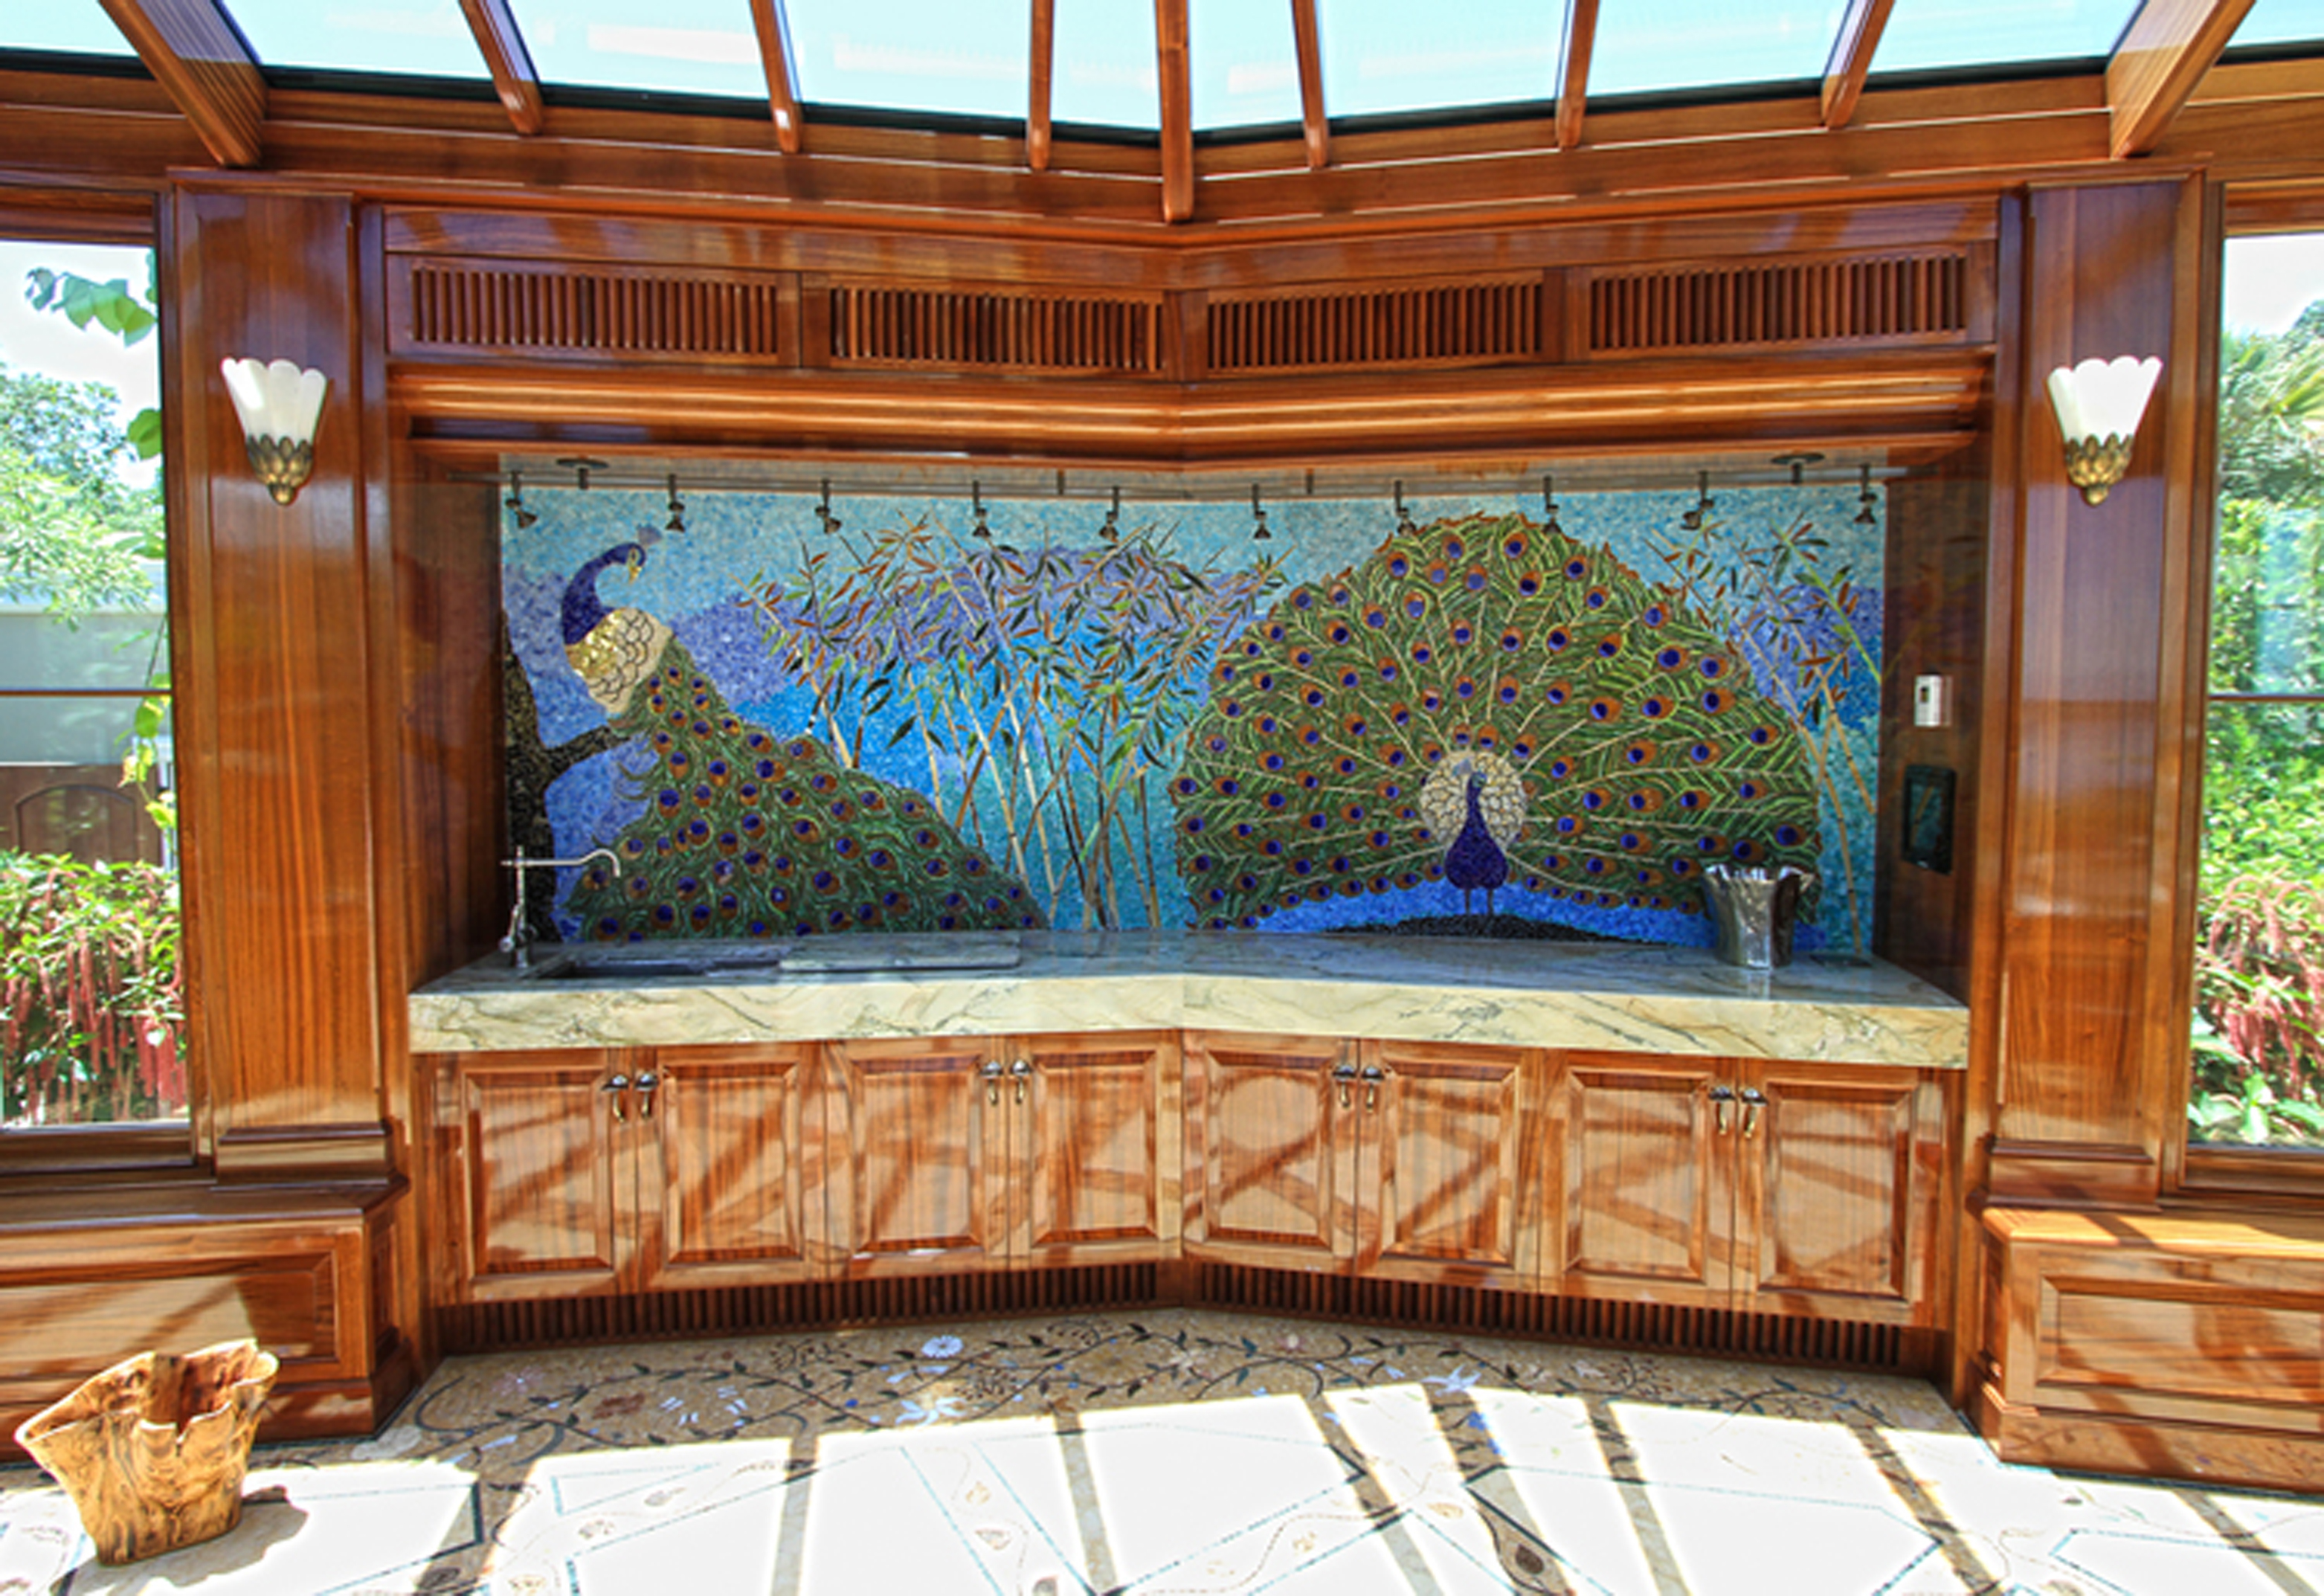 Interior mural in the conservatory greenhouse